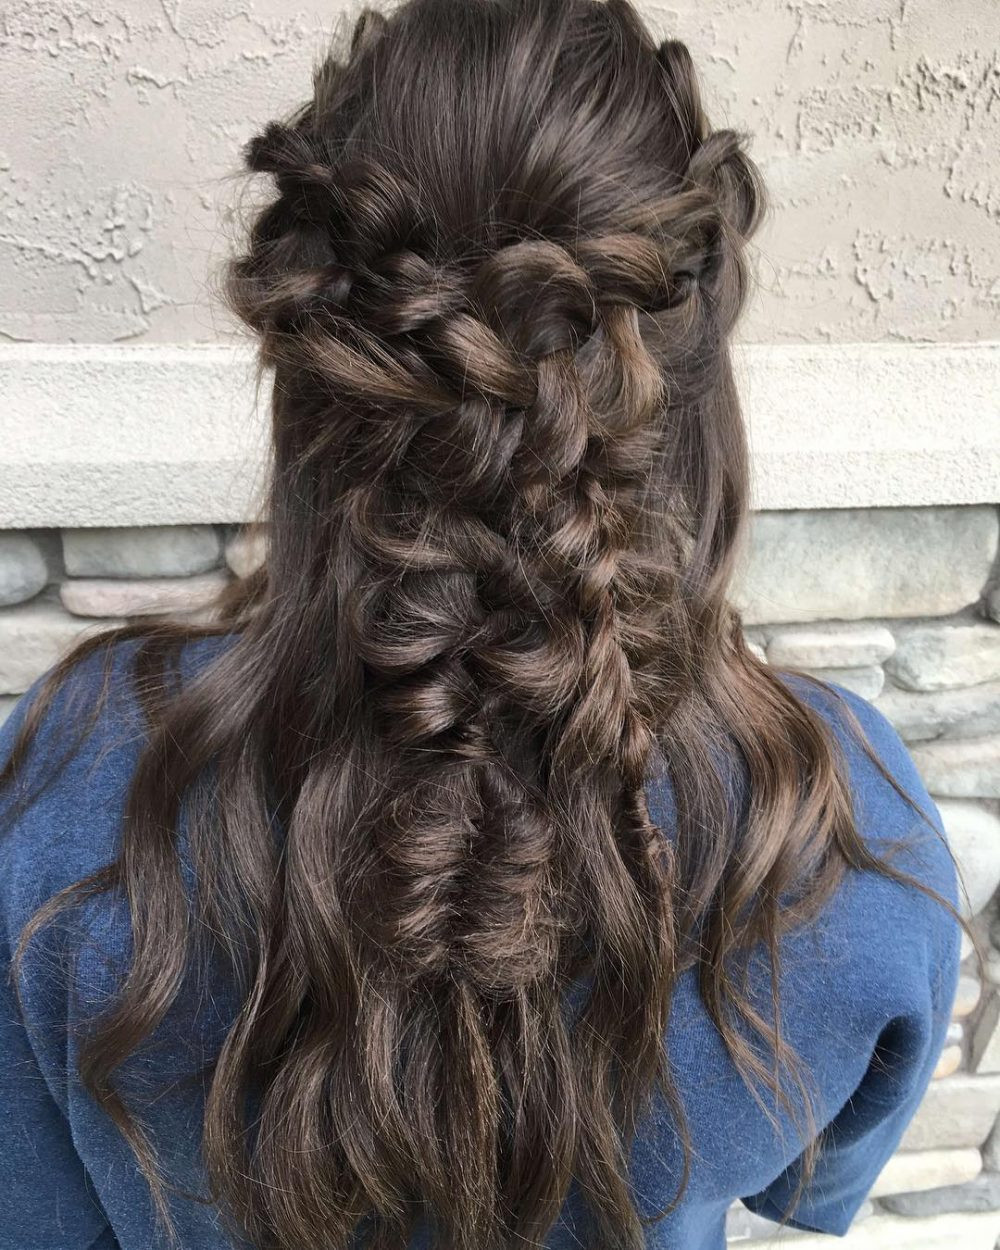 Pageant Hairstyles For Long Hair
 31 Prom Hairstyles for Long Hair That Are Gorgeous in 2019